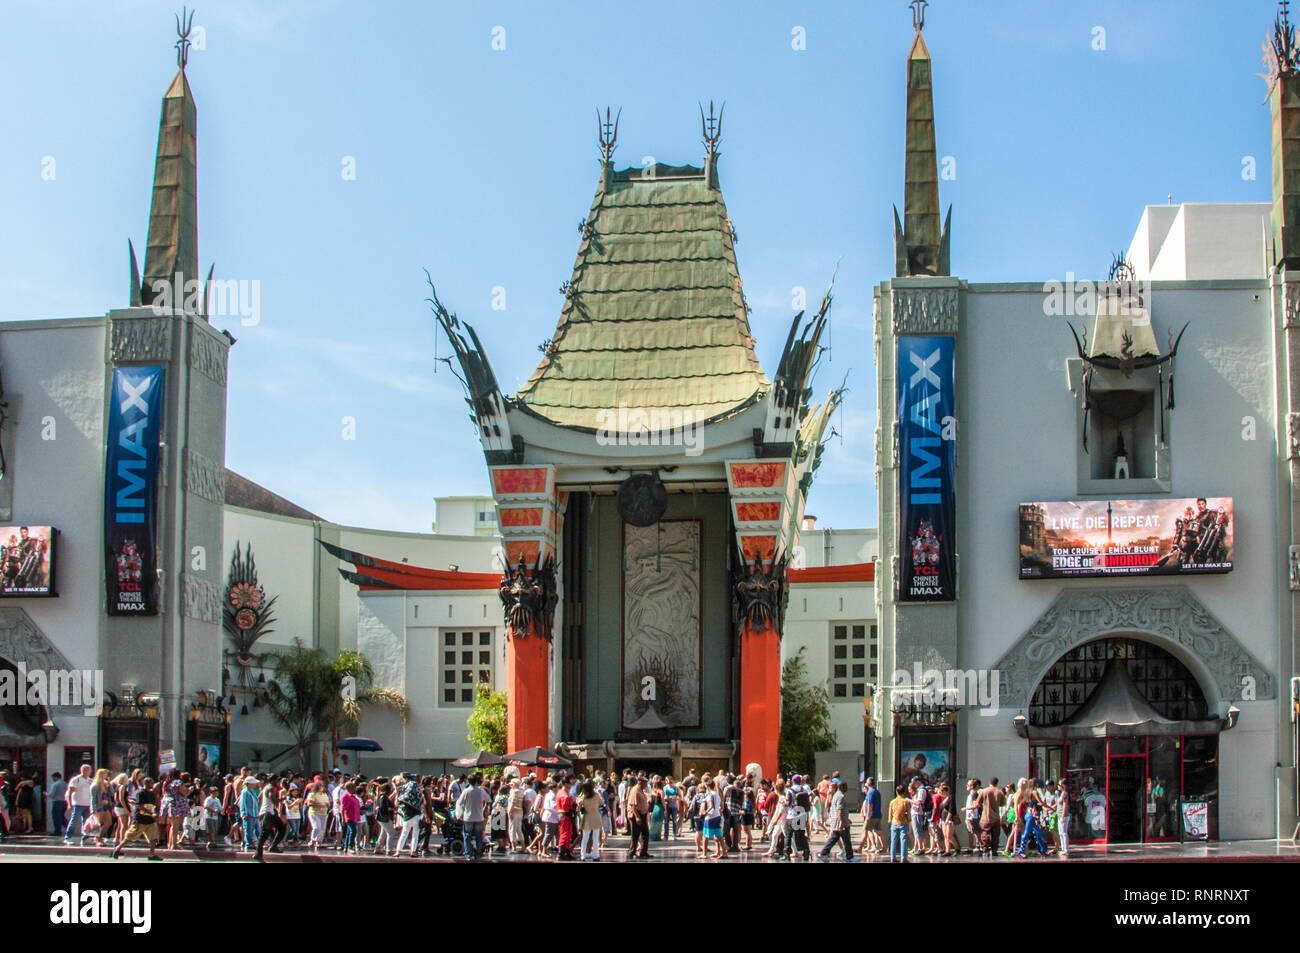 Hollywood, Los Angeles, California USA - June 14, 2014: One of the main recognizable attractions of Los Angeles is the Chinese Theater in Hollywood Stock Photo